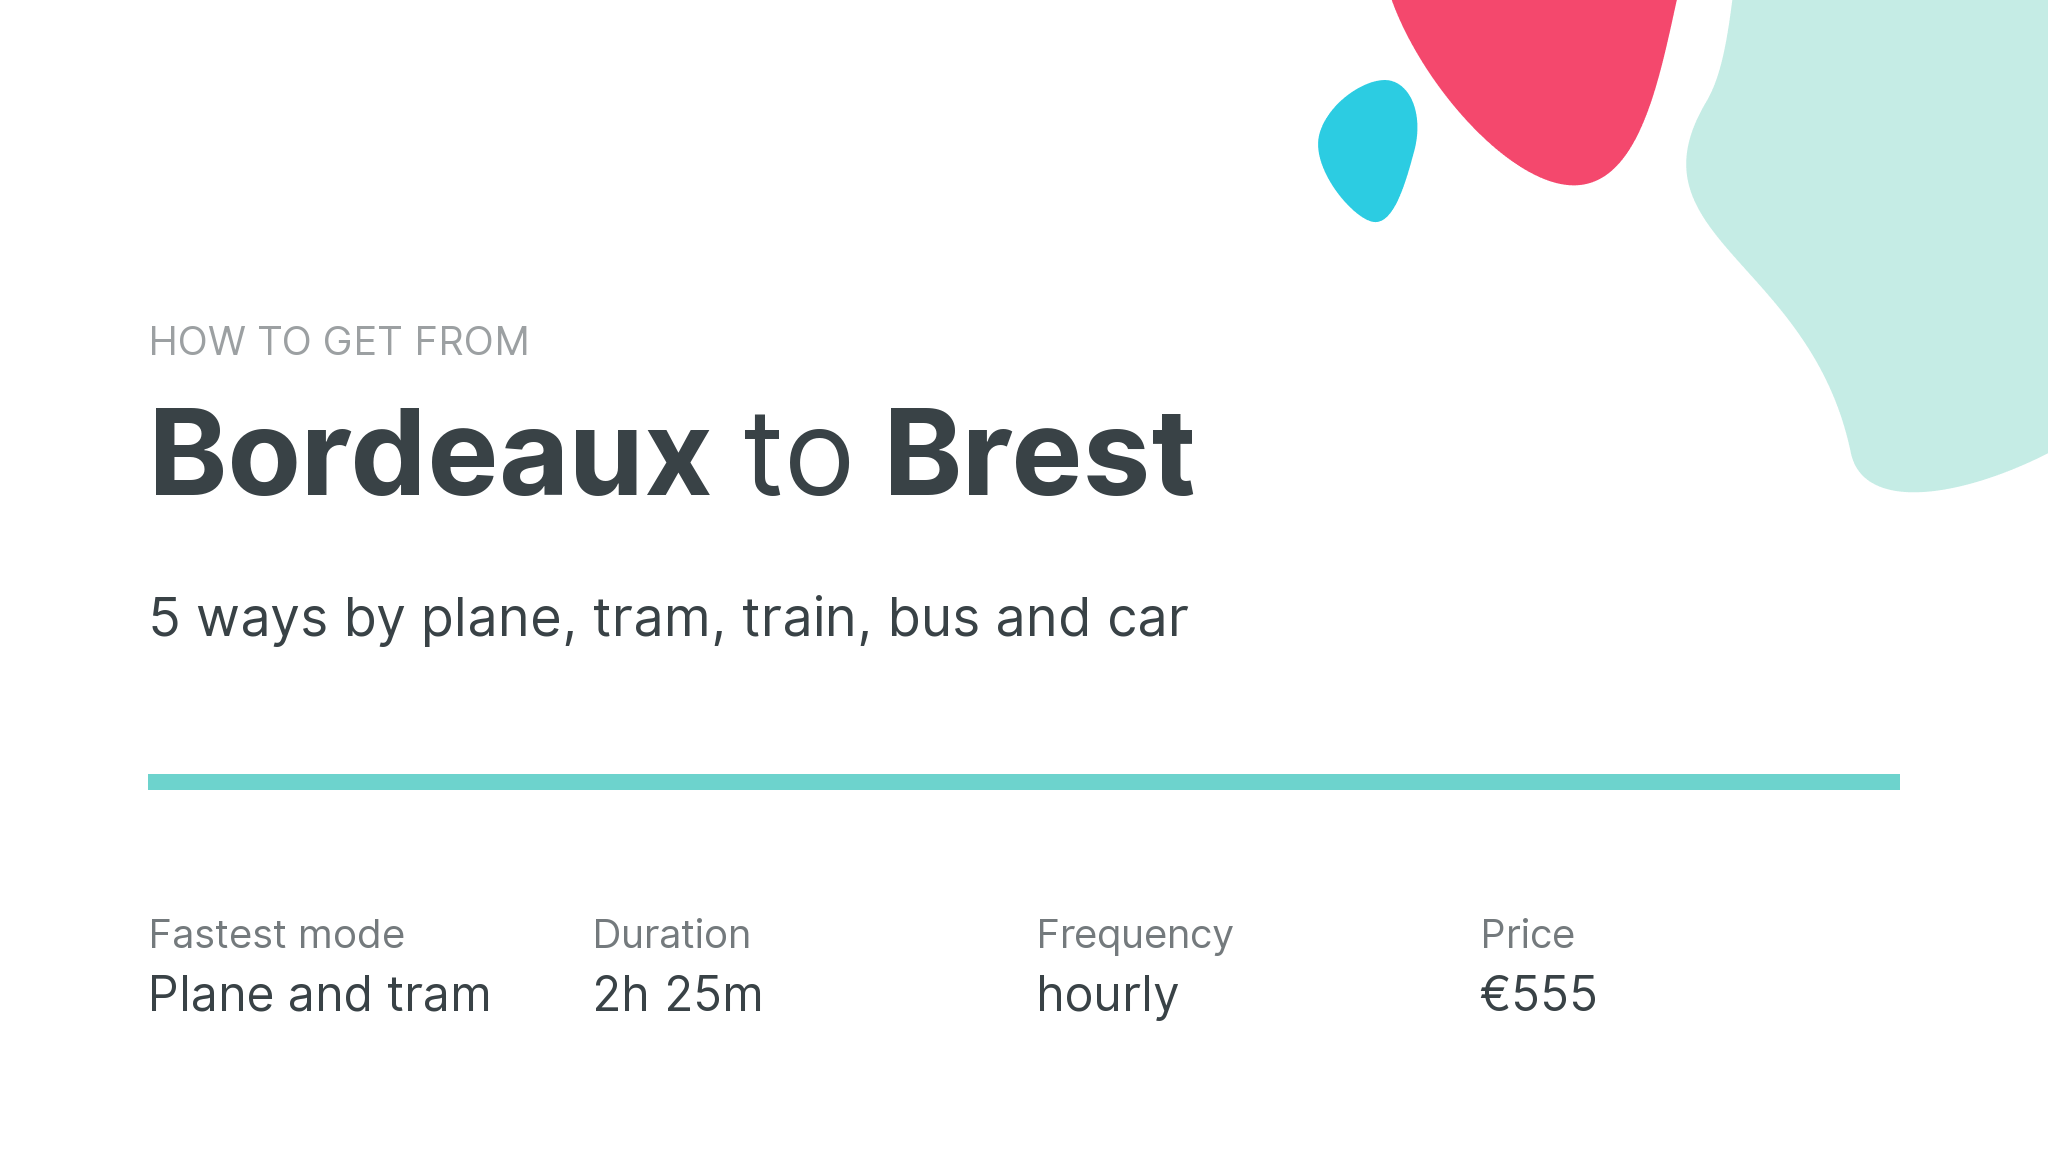 How do I get from Bordeaux to Brest